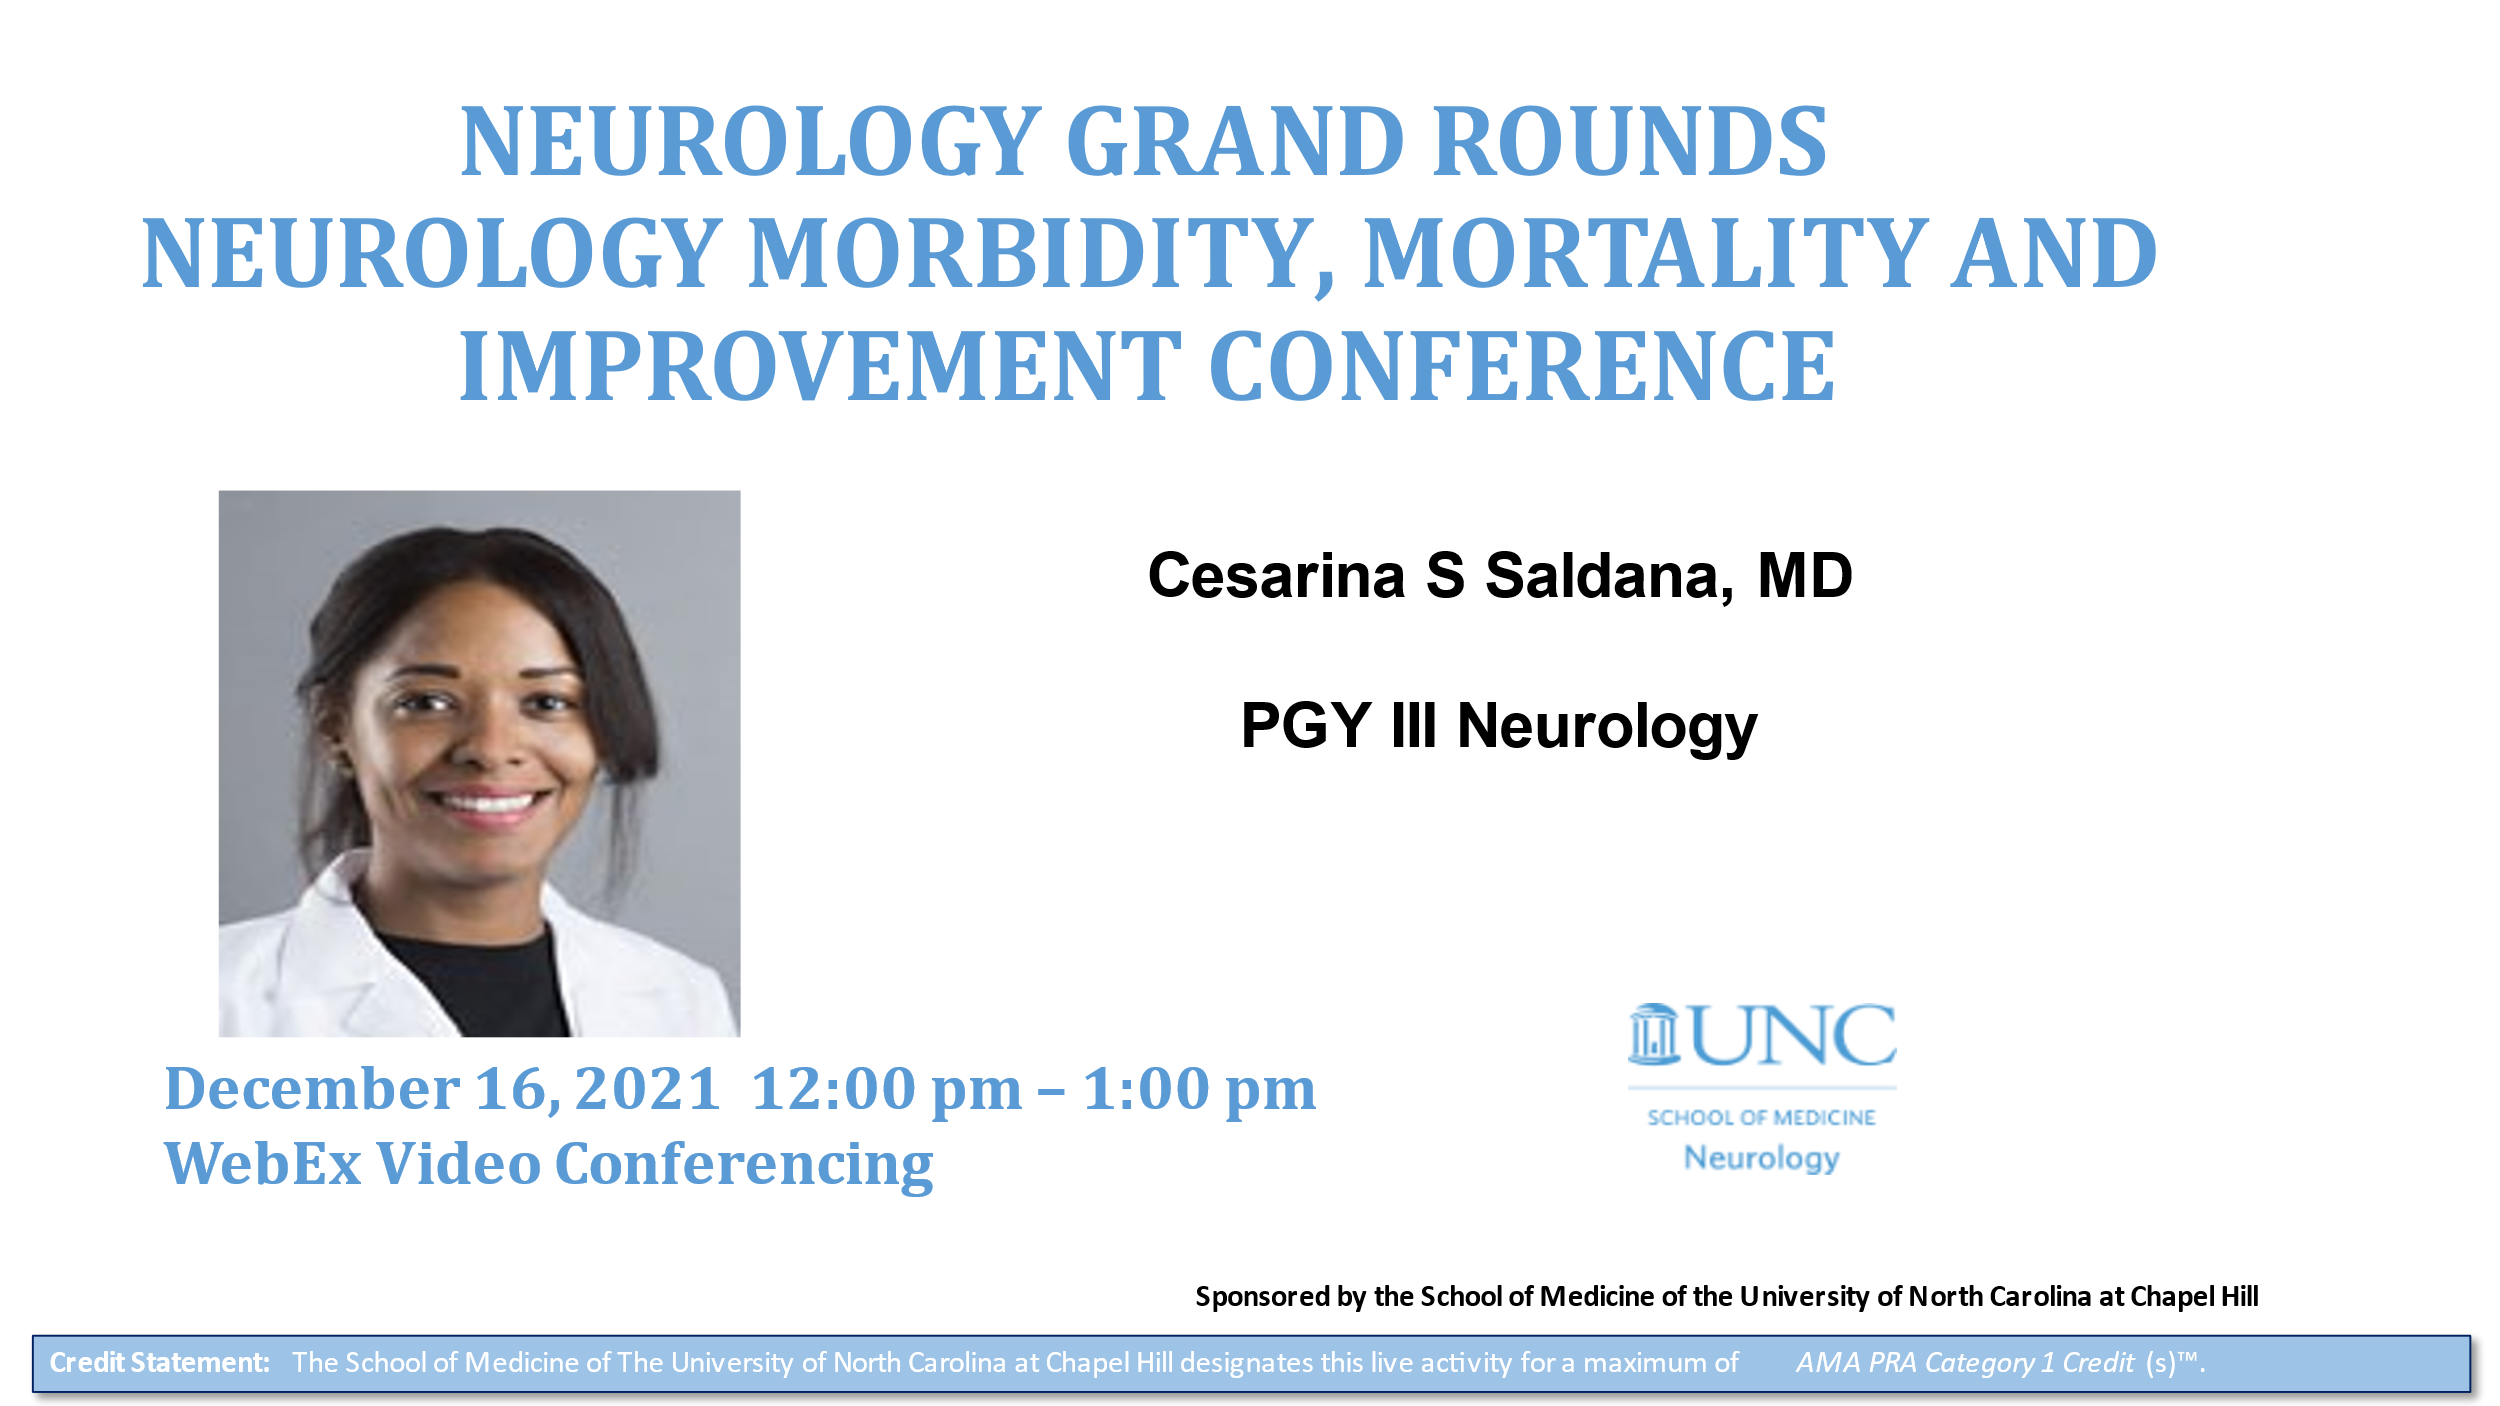 Grand Rounds - Neurology Morbidity, Mortality and Improvement Conference with Cesarina S. Saldana, MD, PGY3 UNC Neurology, December 16, 2021 12pm-1pm, WebEx video conferencing